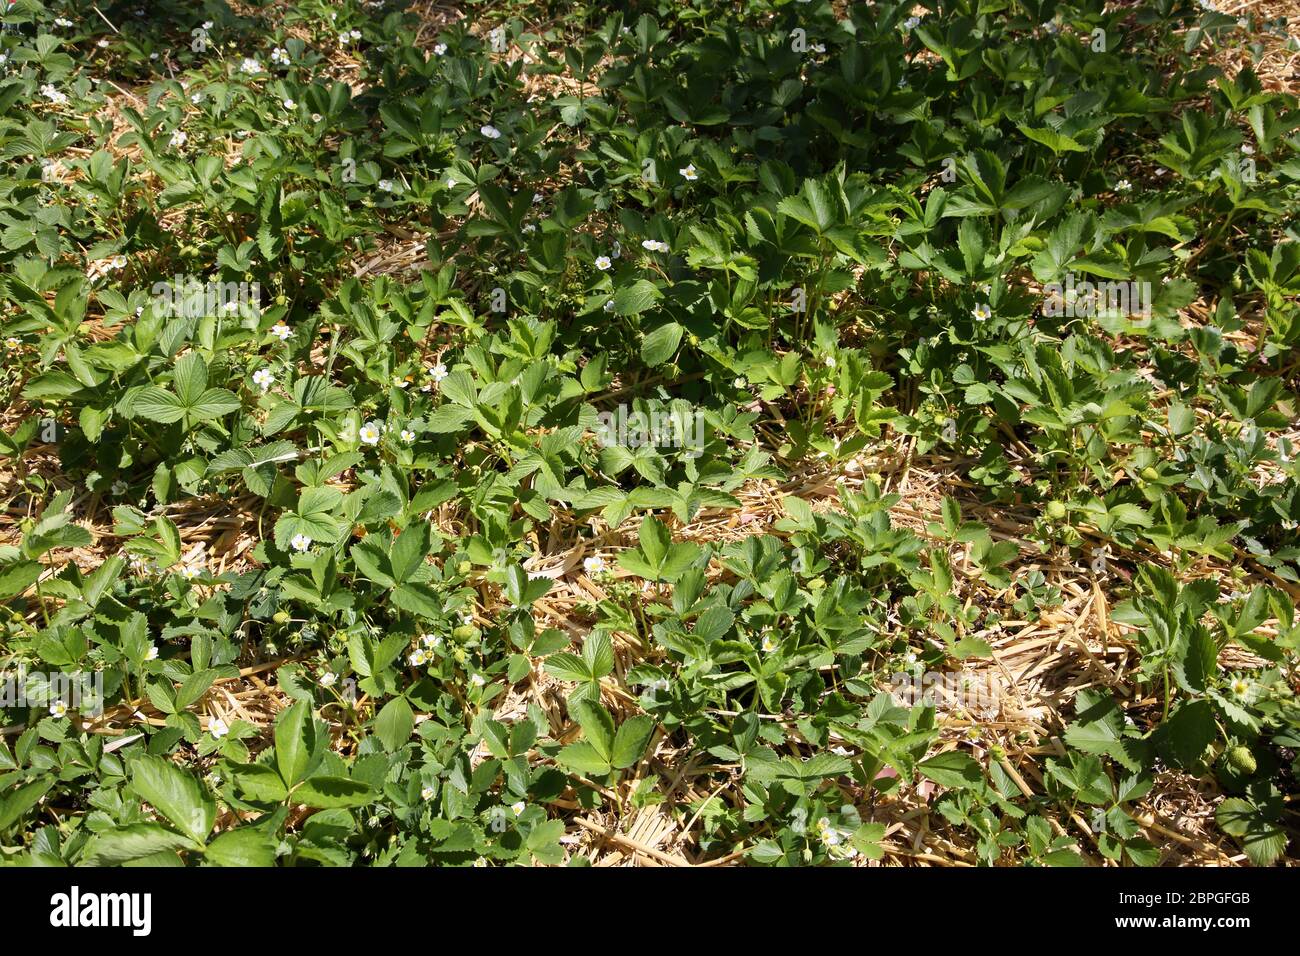 Strawberries Flowering and Fruiting in Straw Mulch In Garden Surrey England Stock Photo